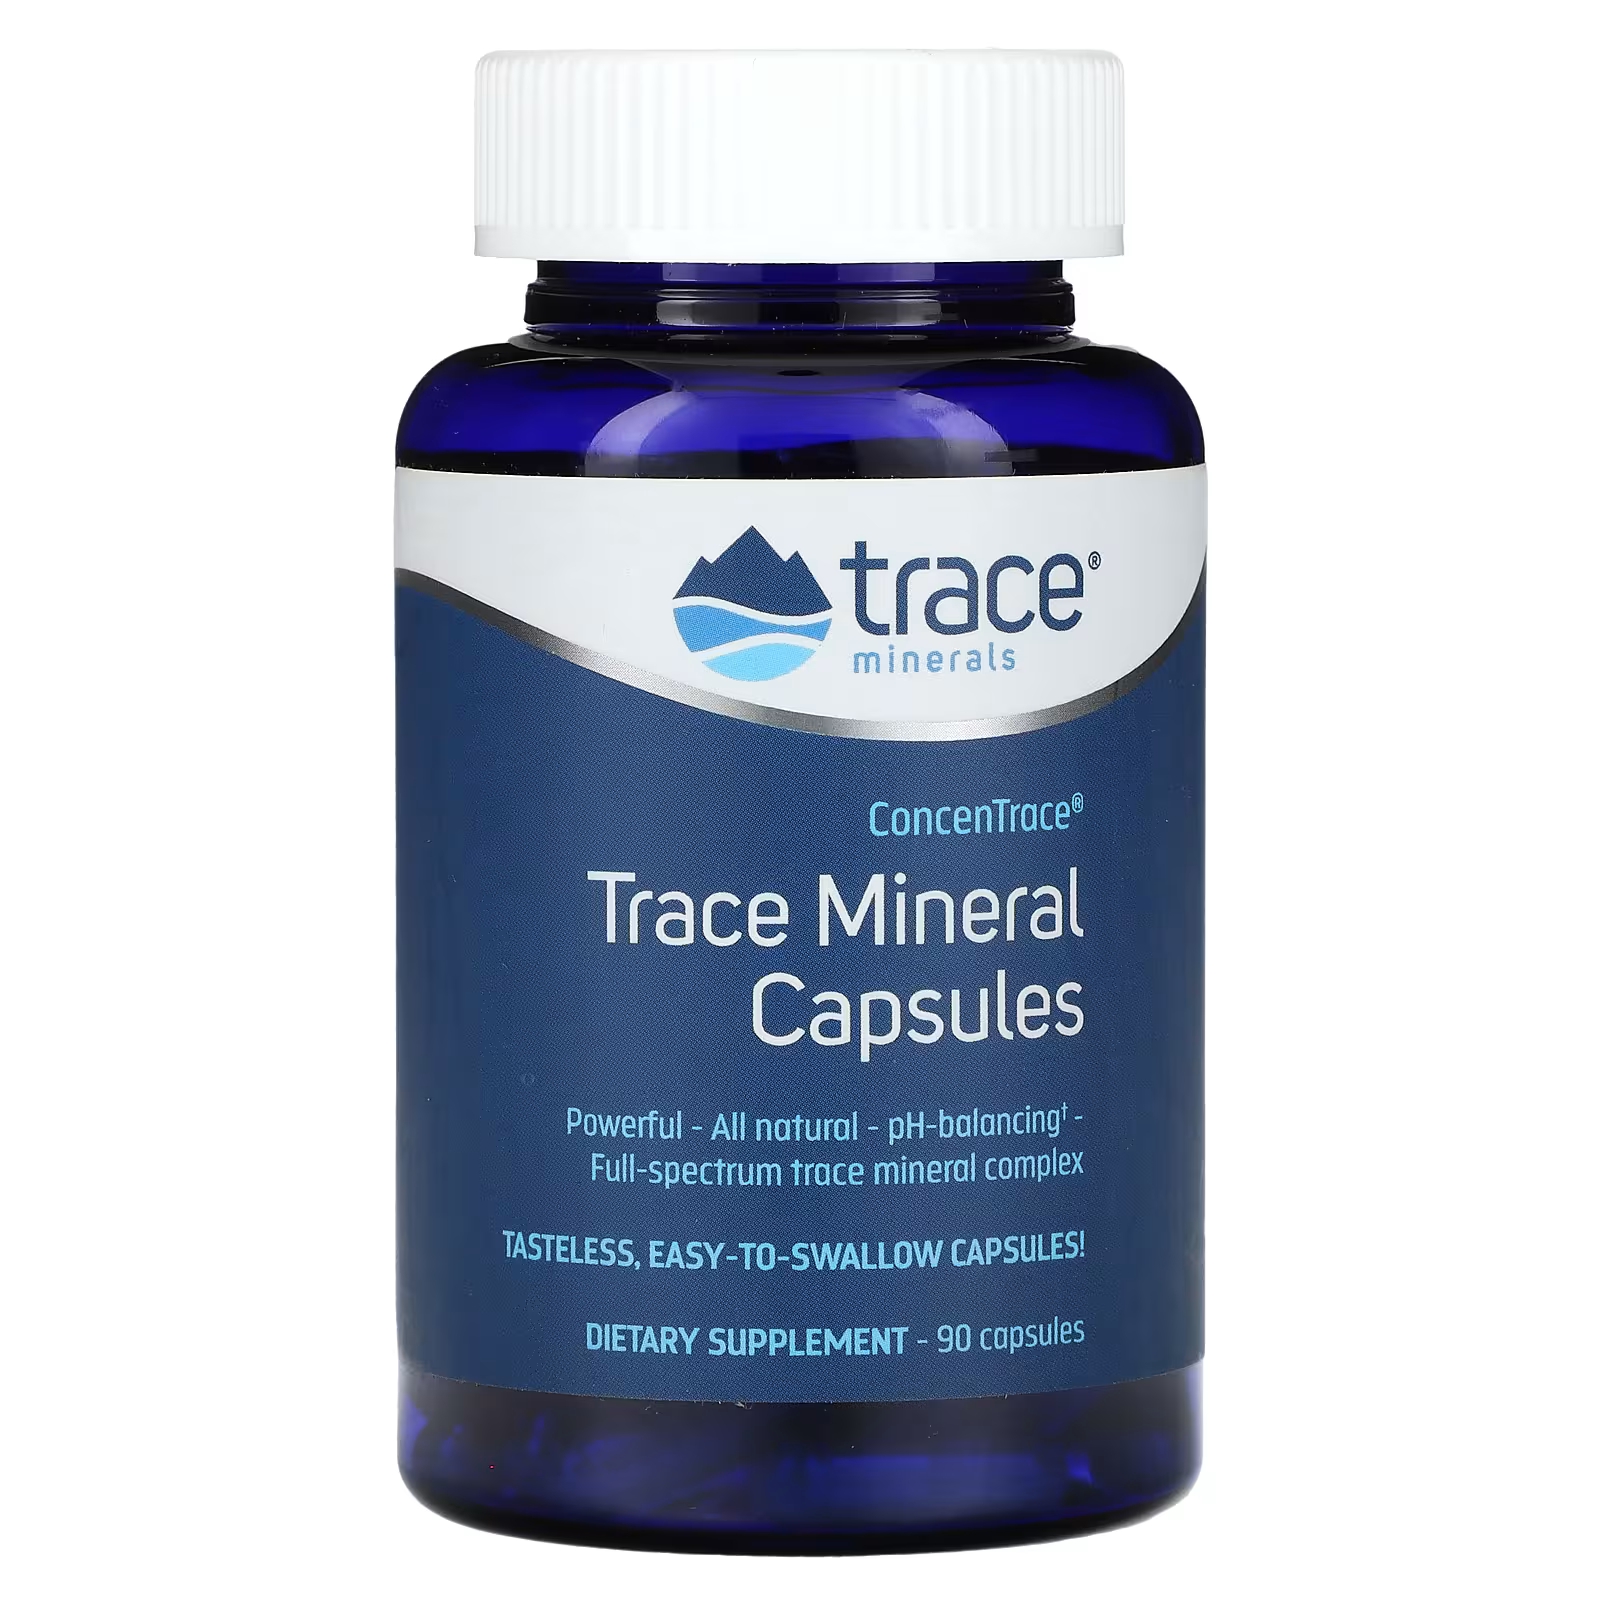 Пищевая добавка Trace Minerals ConcenTrace Trace Mineral Capsules, 90 капсул пищевая добавка trace minerals concentrace с микроэлементами 270 капсул